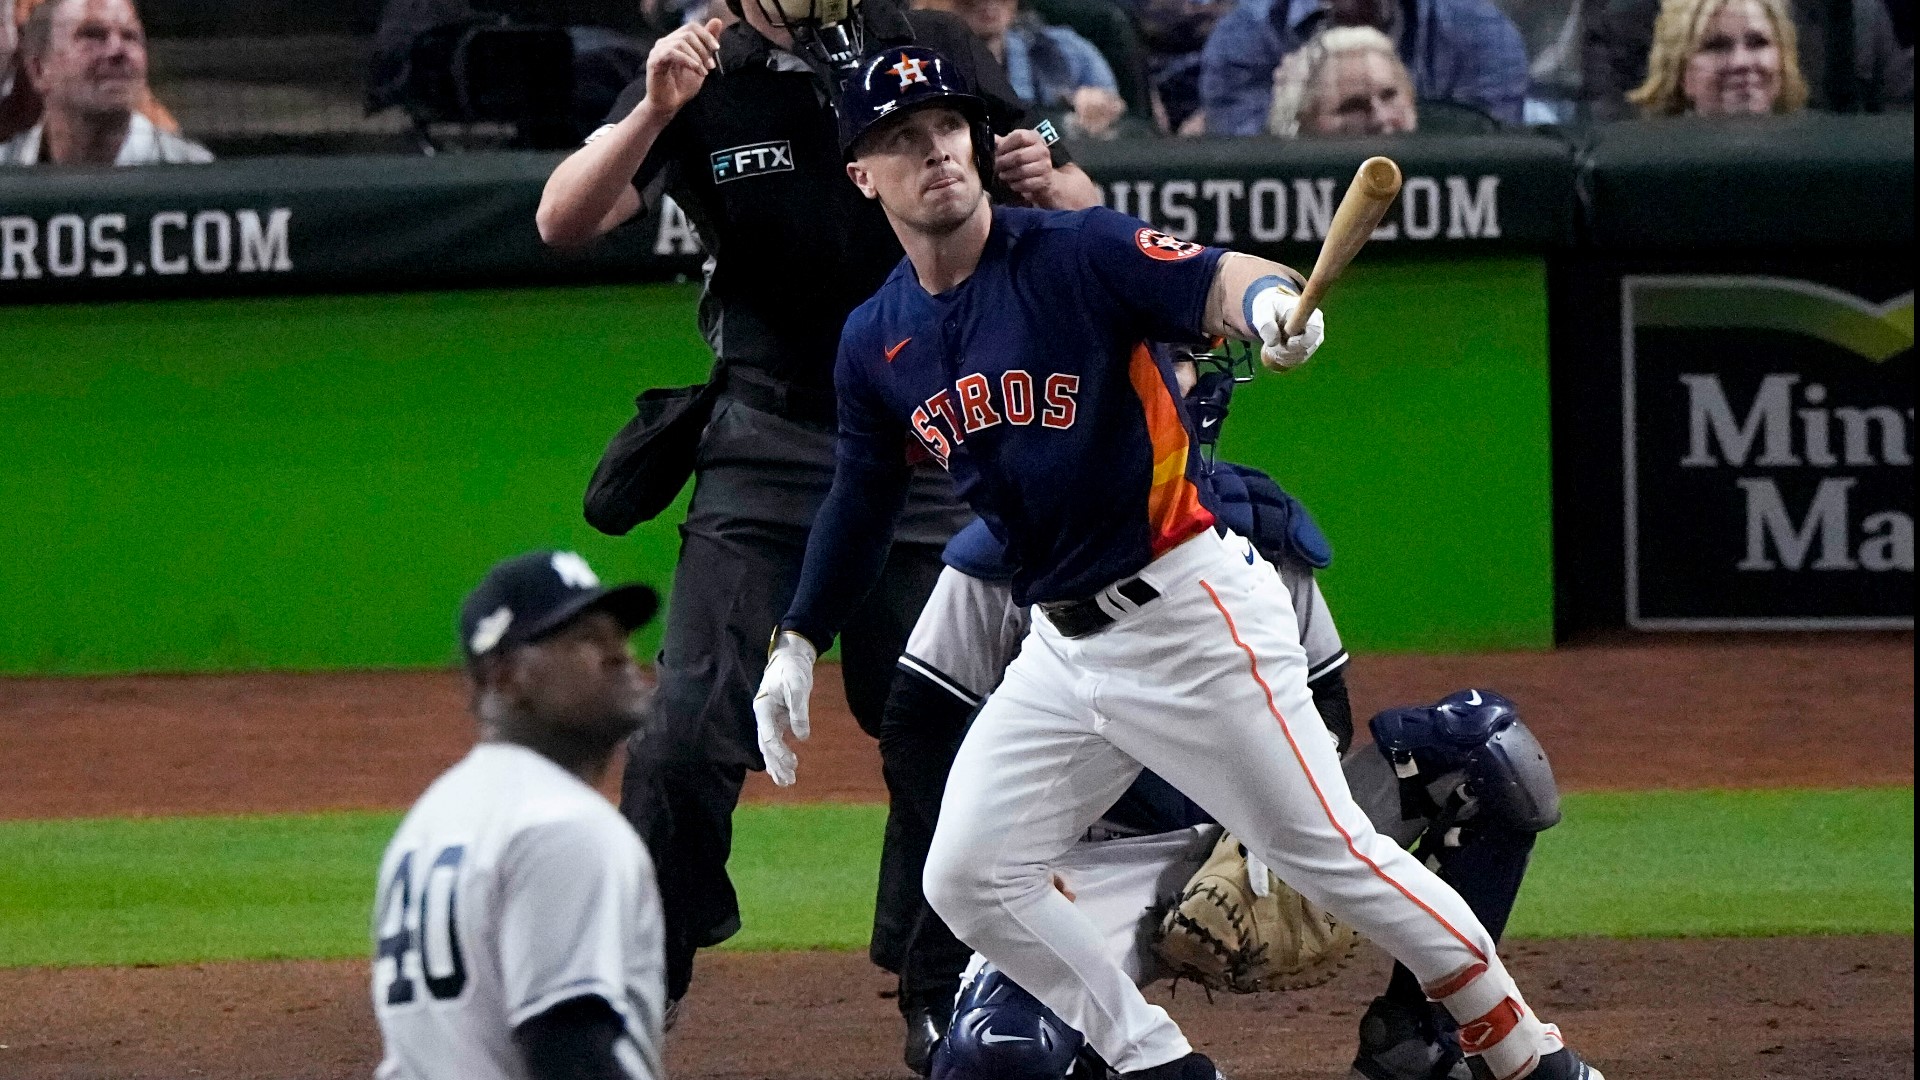 The Astros now have a 2-0 series lead, following Thursday's 3-2 win over New  York.